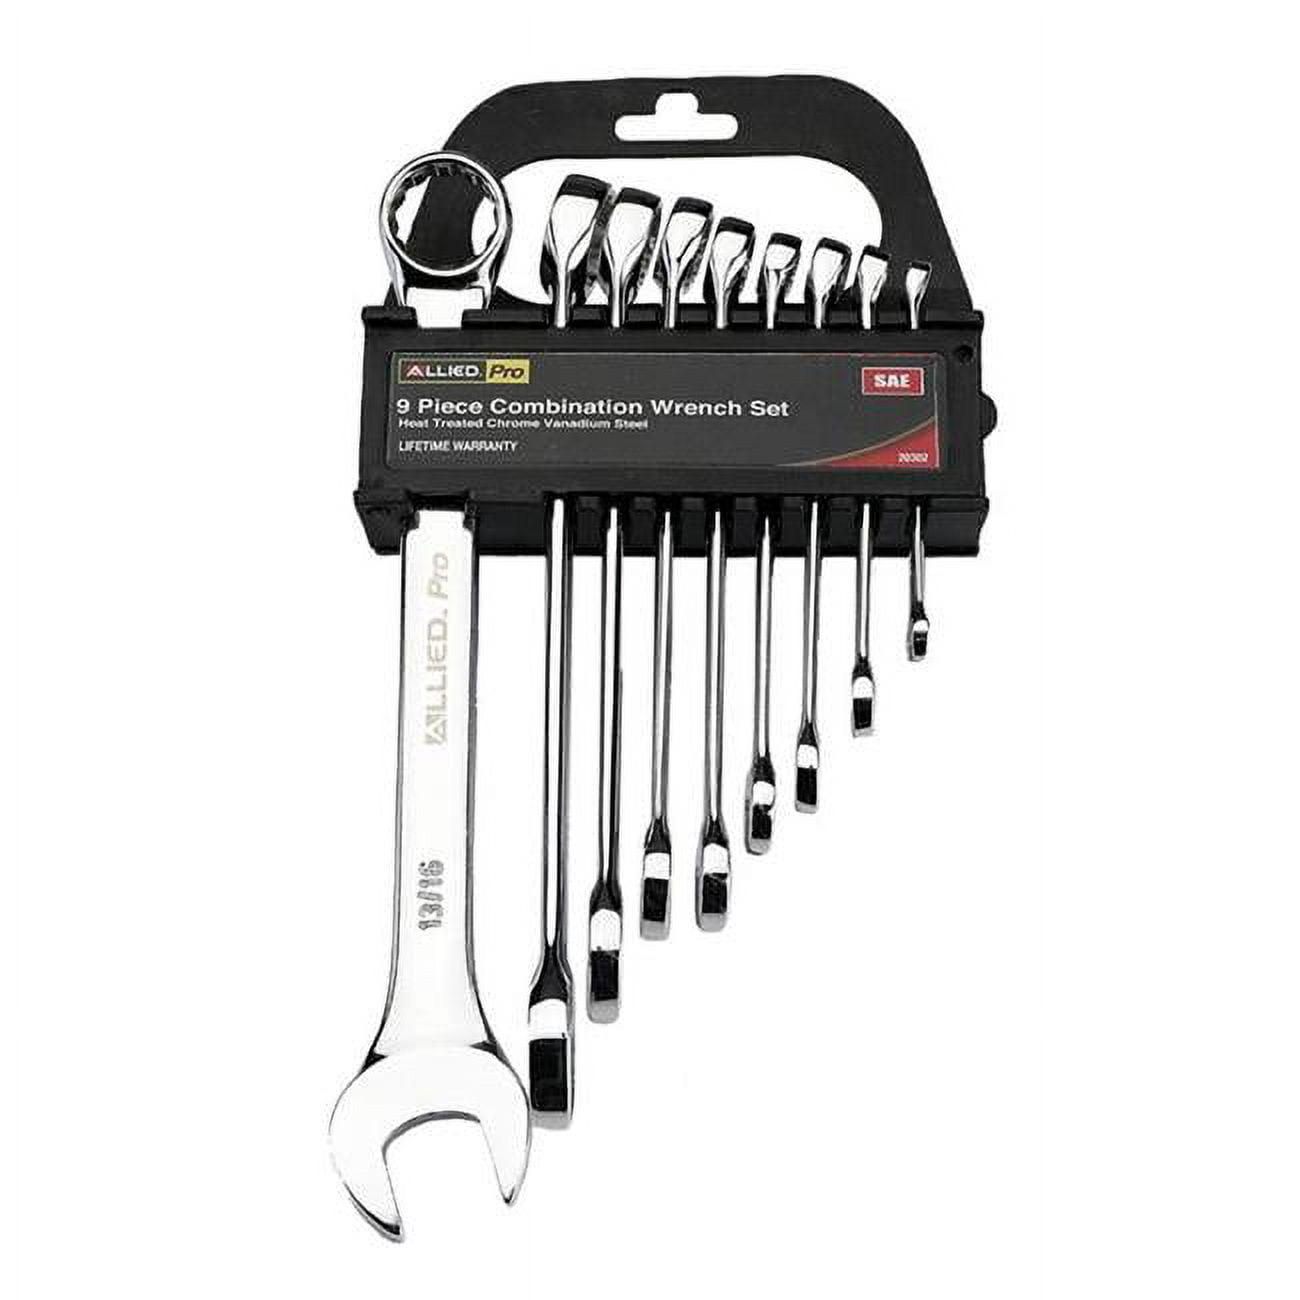 Picture of Allied 20302 SAE Full Polished Combination Wrench Set - 9 Piece